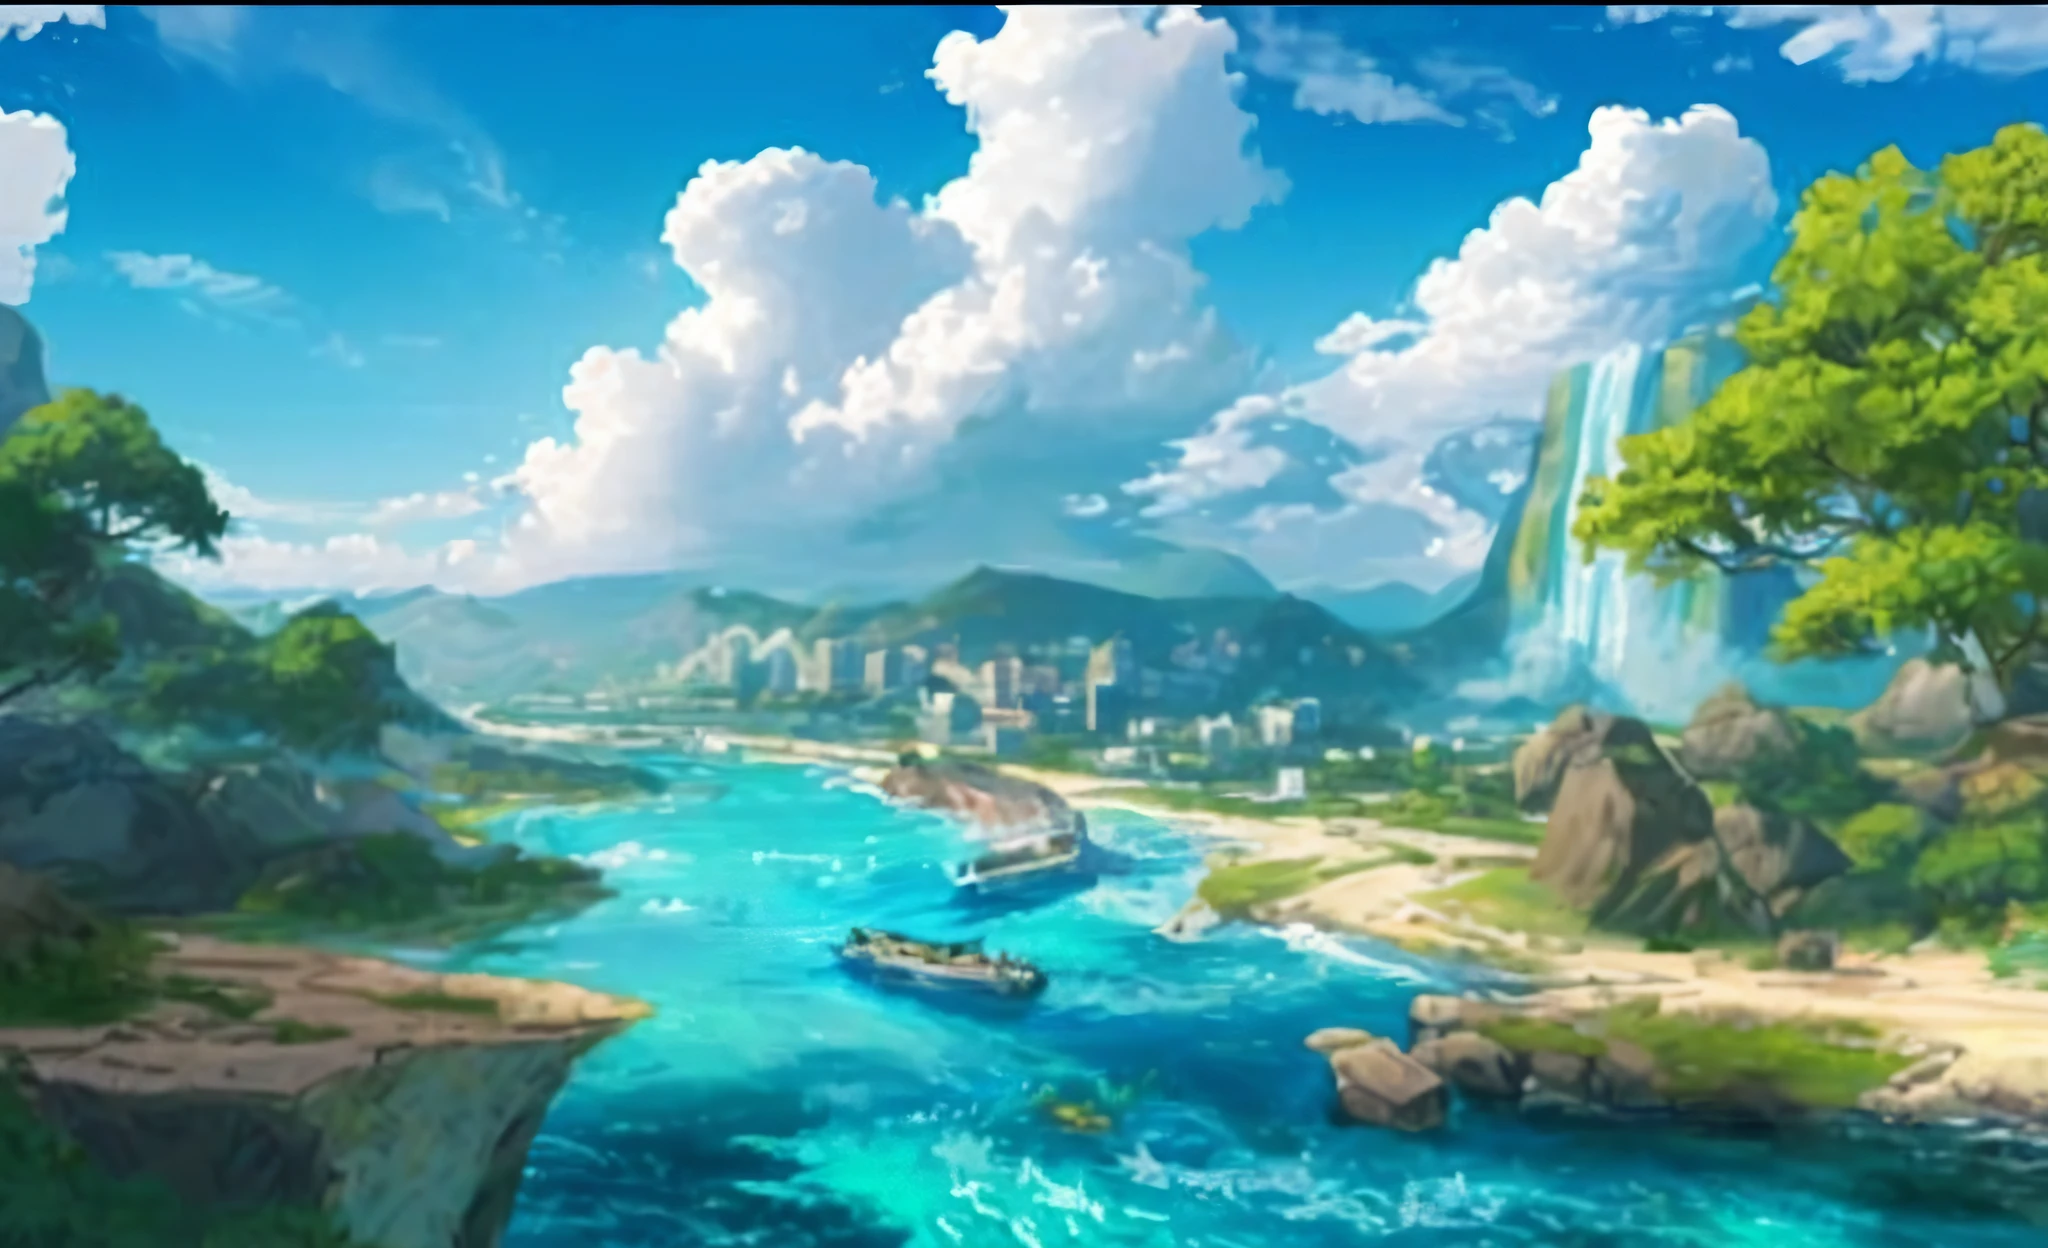 a painting of a river with a boat in it and a mountain in the background, game background, island background, rio de janeiro in an anime film, amazing wallpaper, epic and stunning, tropical coastal city, anime scenery concept art, beautiful environment, anime landscape, anime landscape wallpaper, epic background, concept art. epic landscape, scenery art detailed, epic scenery